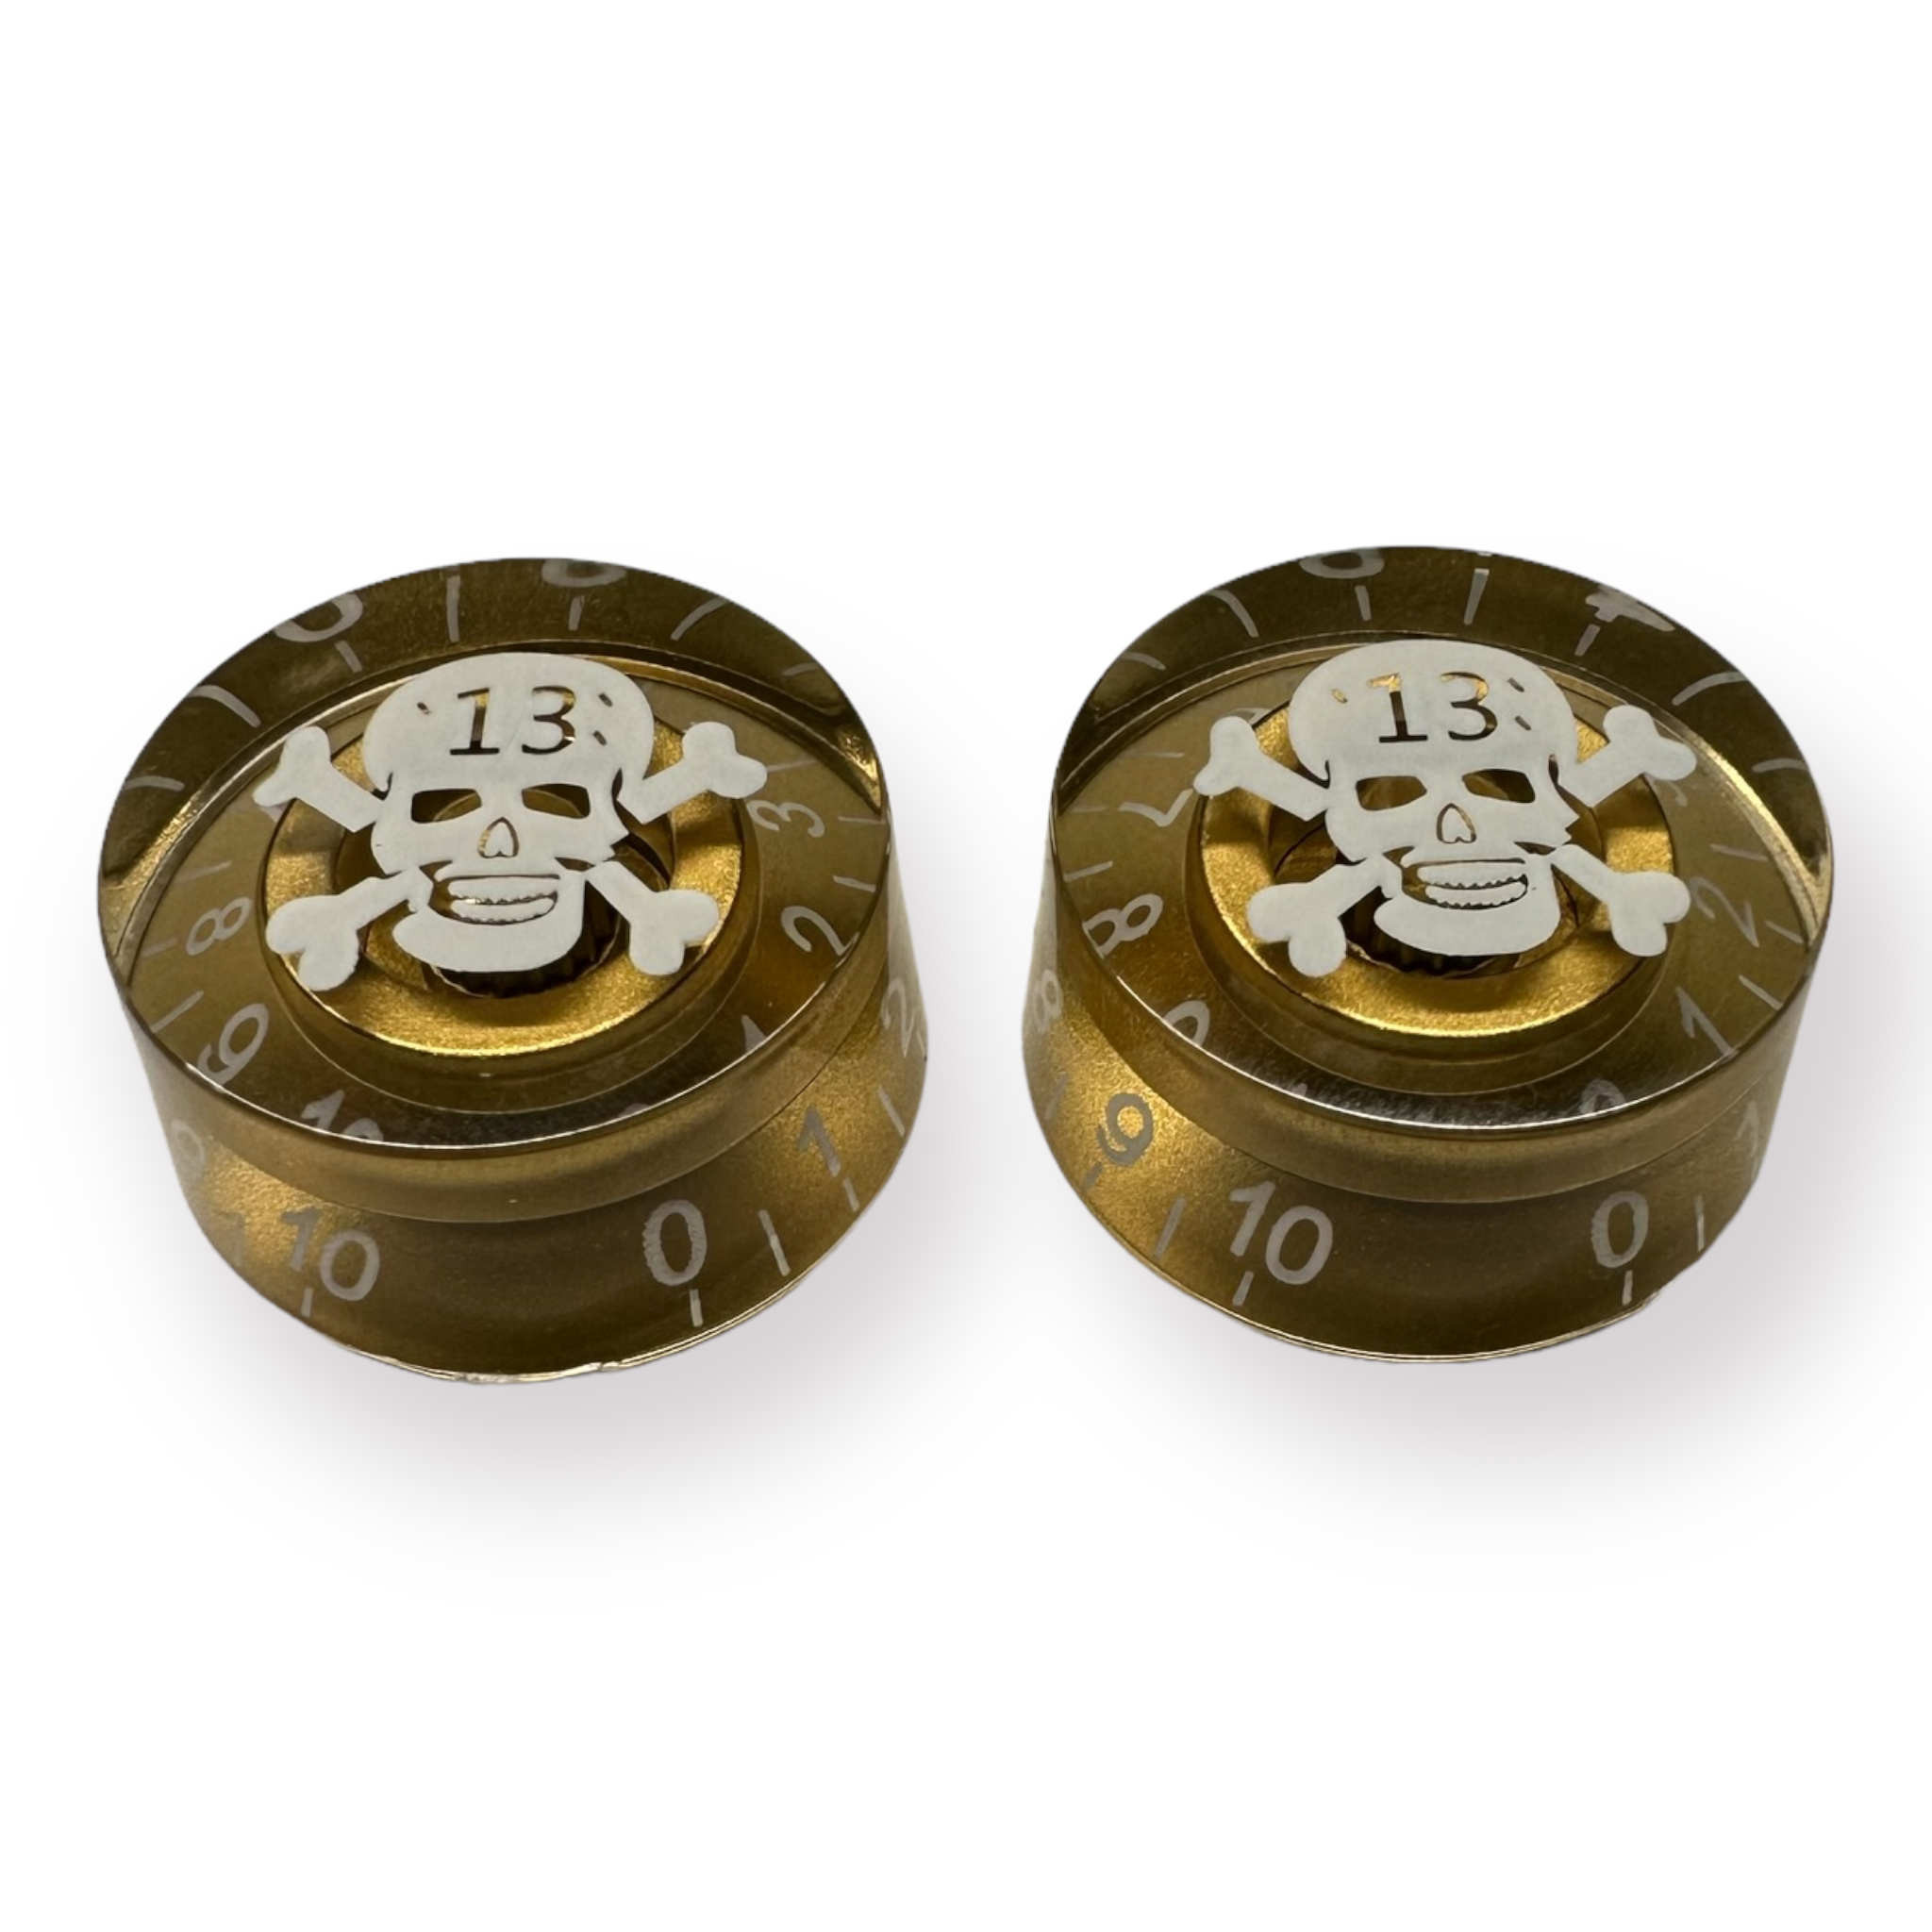 AxLabs Speed Knobs with Skull Graphic (Set of 2) - AxLabs